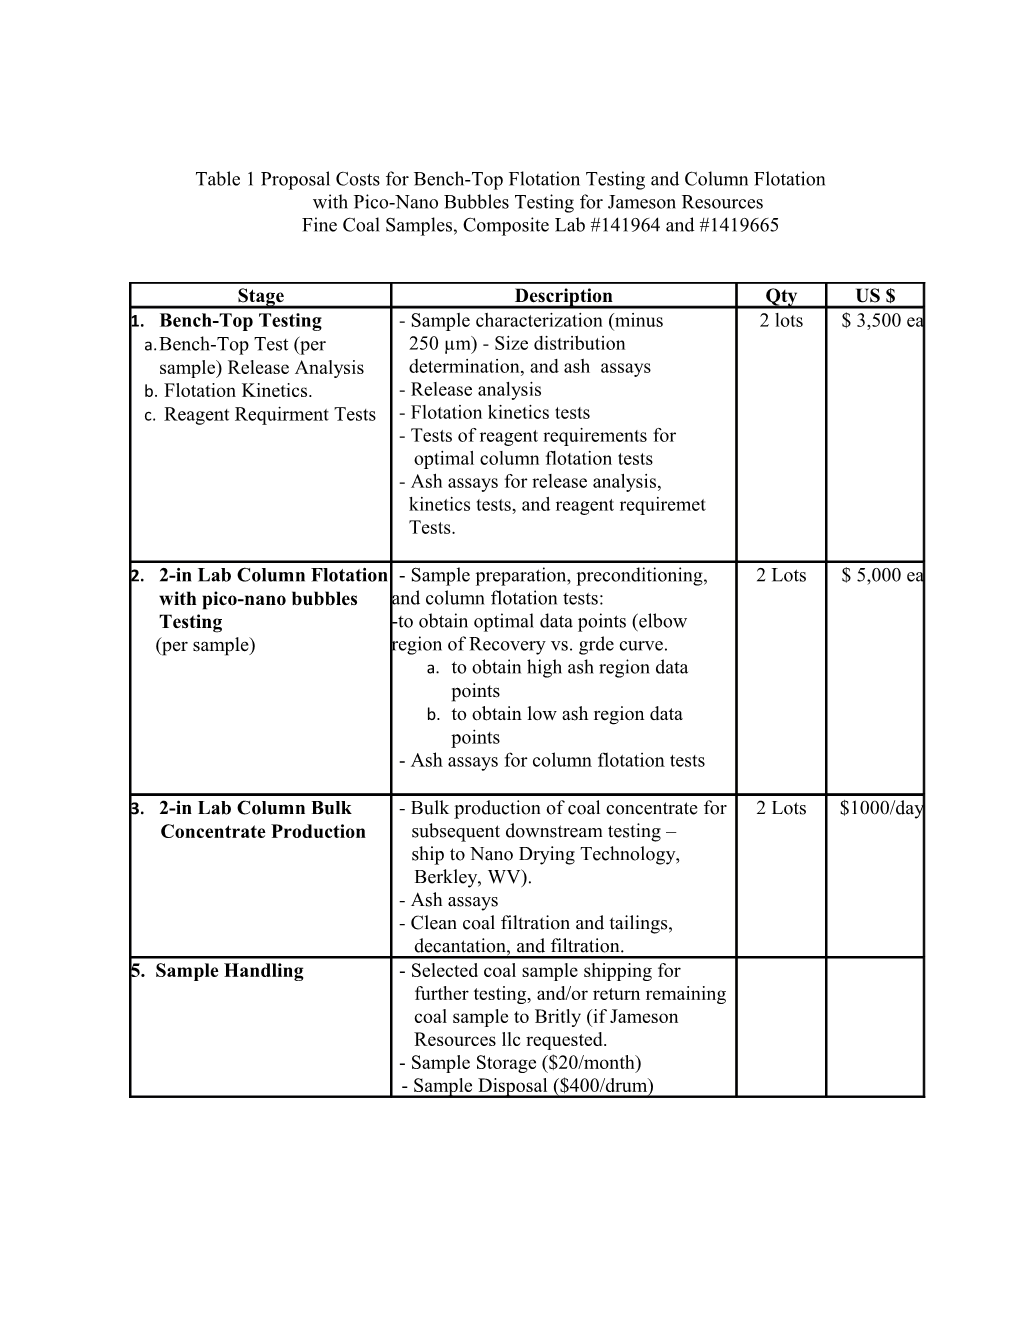 Table 1 Proposal Costs for Bench-Top Flotation Testing and Column Flotation